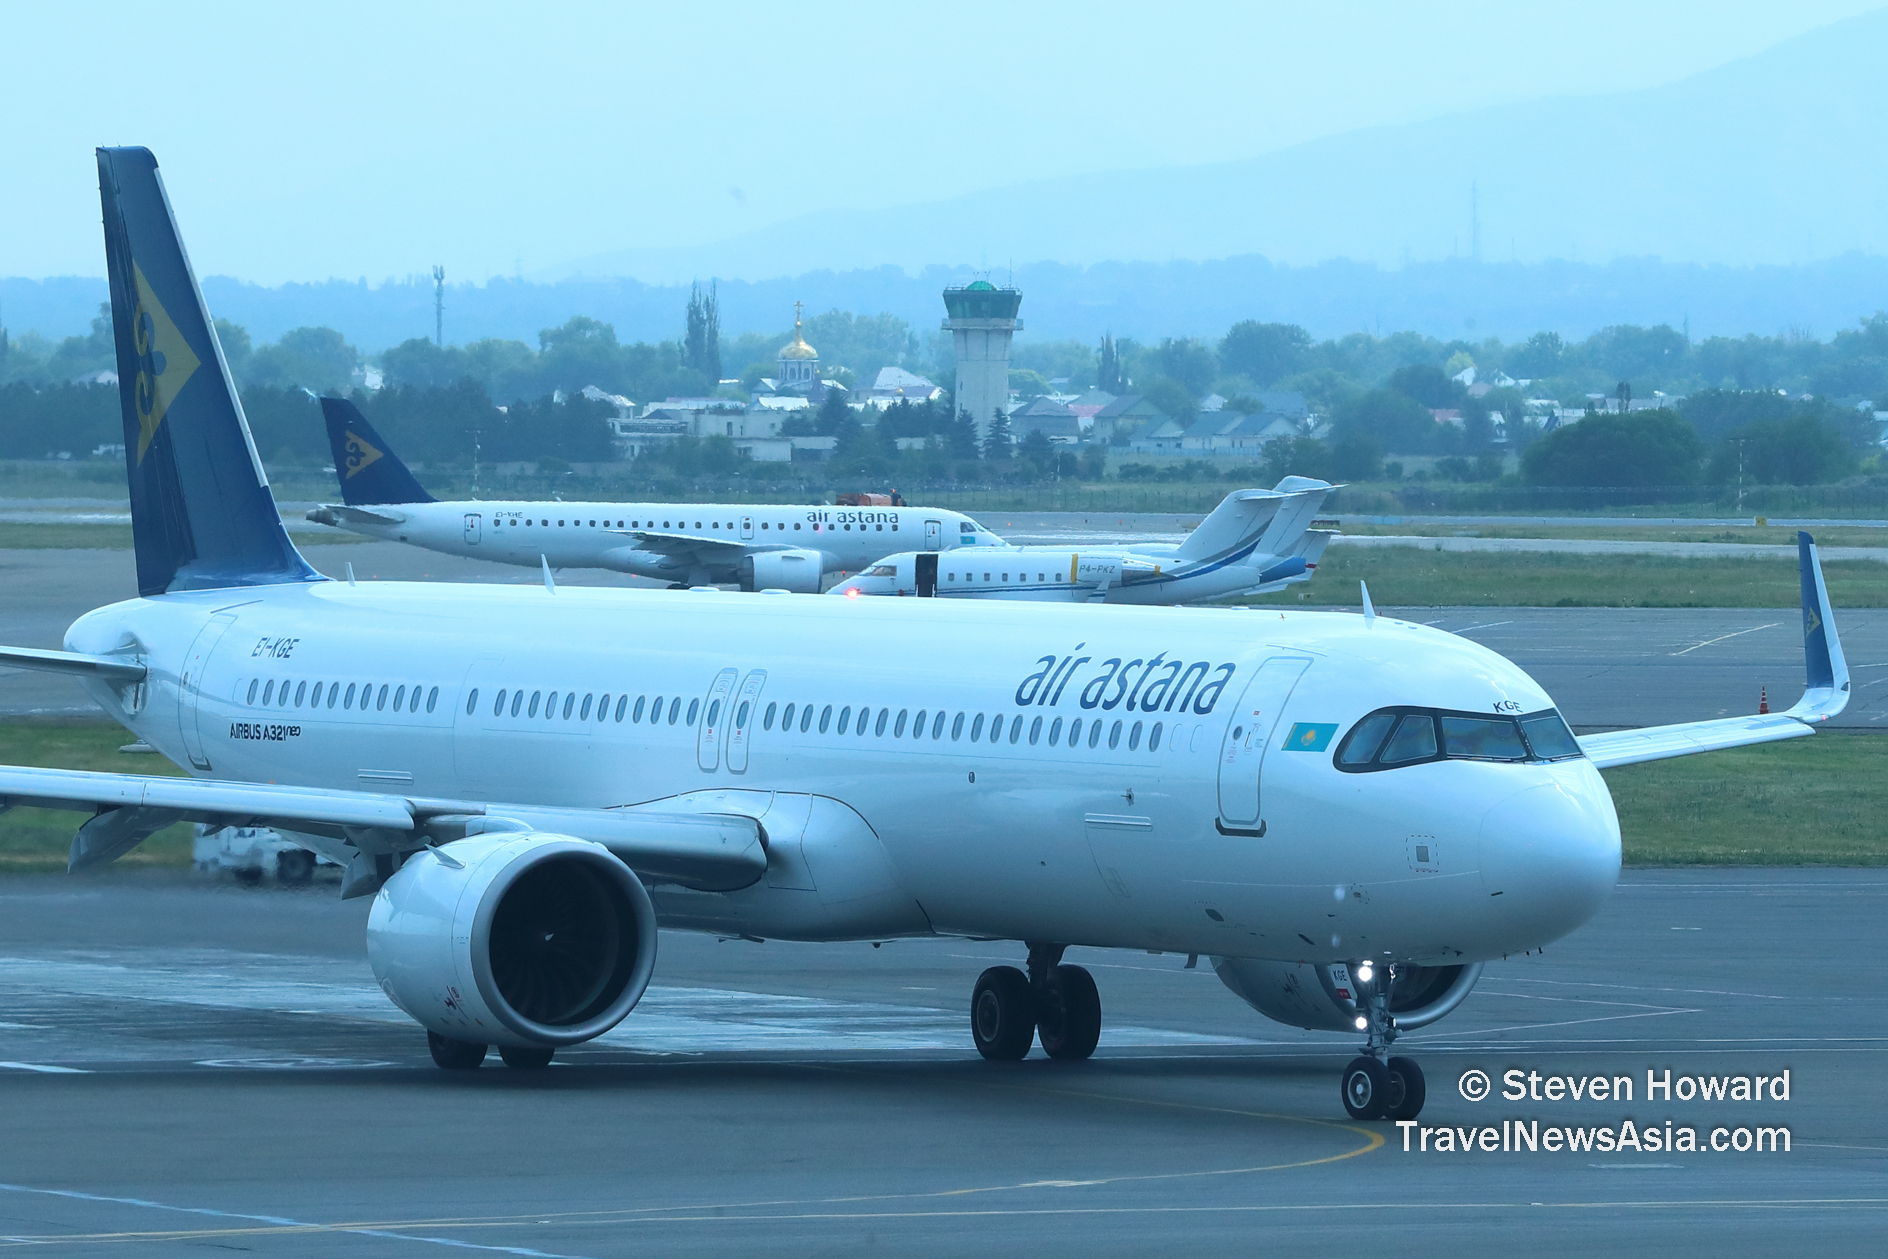 Air Astana A321neo reg: EI-KGE at ALA. Picture by Steven Howard of TravelNewsAsia.com Click to enlarge.